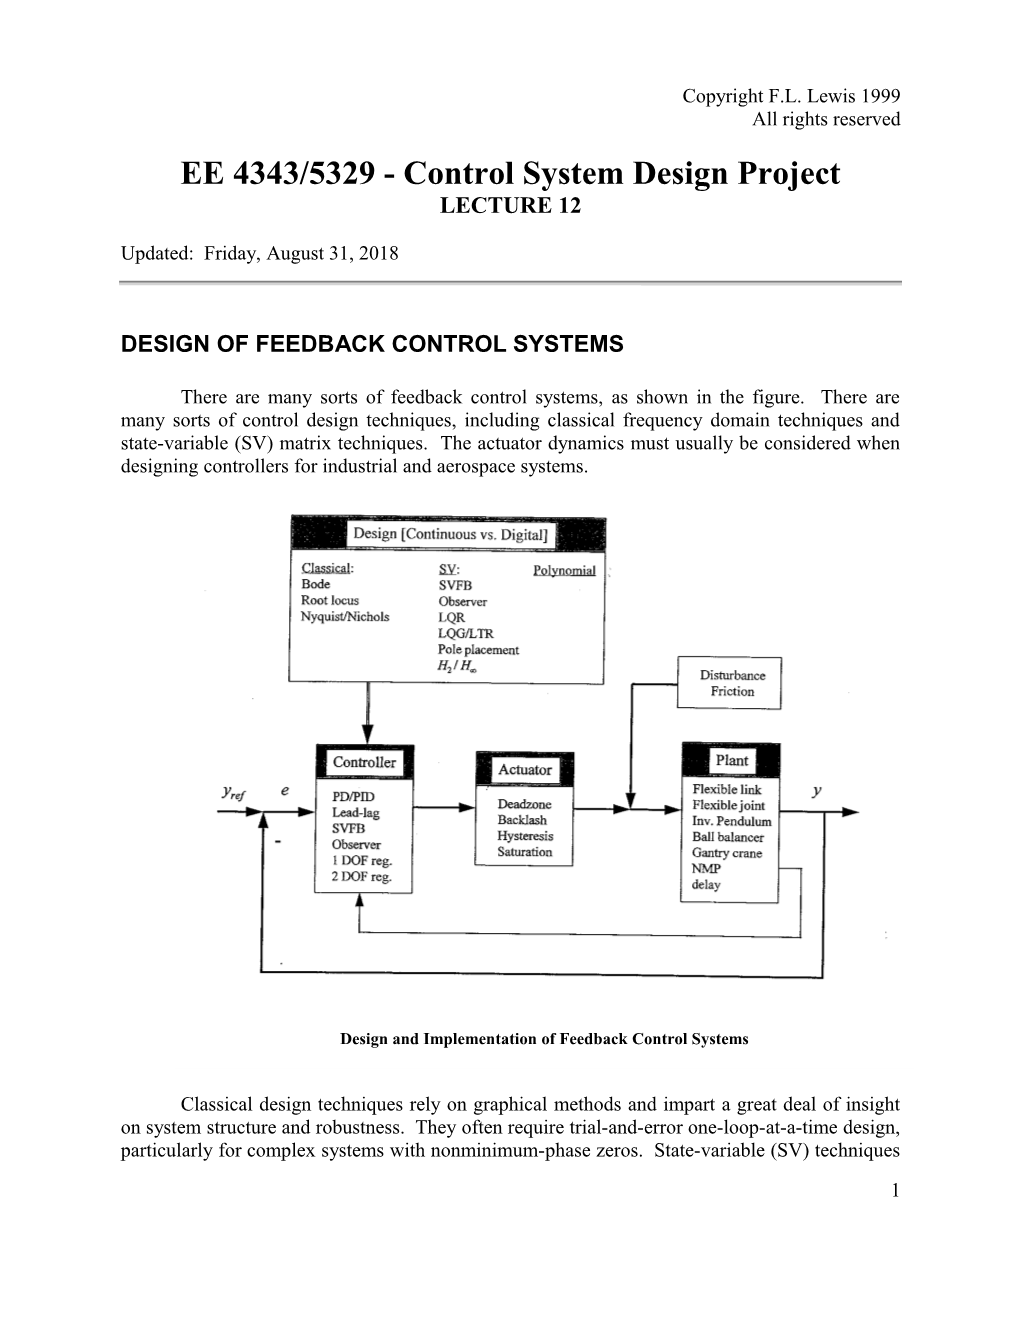 EE 4343/5329 - Control System Design Project